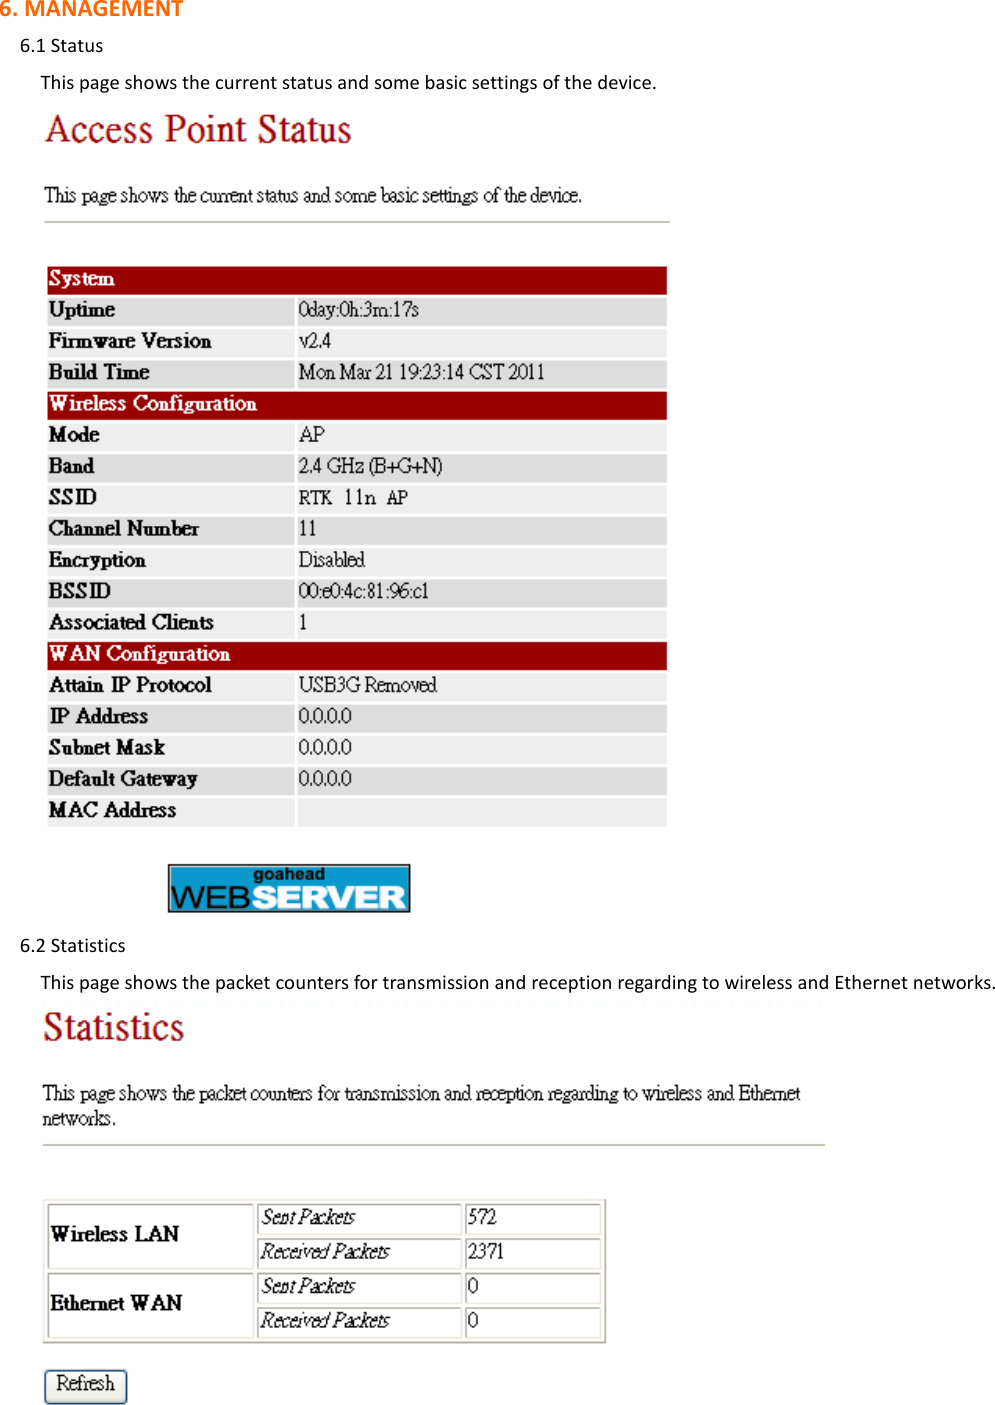 6. MANAGEMENT     6.1 Status This page shows the current status and some basic settings of the device.      6.2 Statistics This page shows the packet counters for transmission and reception regarding to wireless and Ethernet networks.     